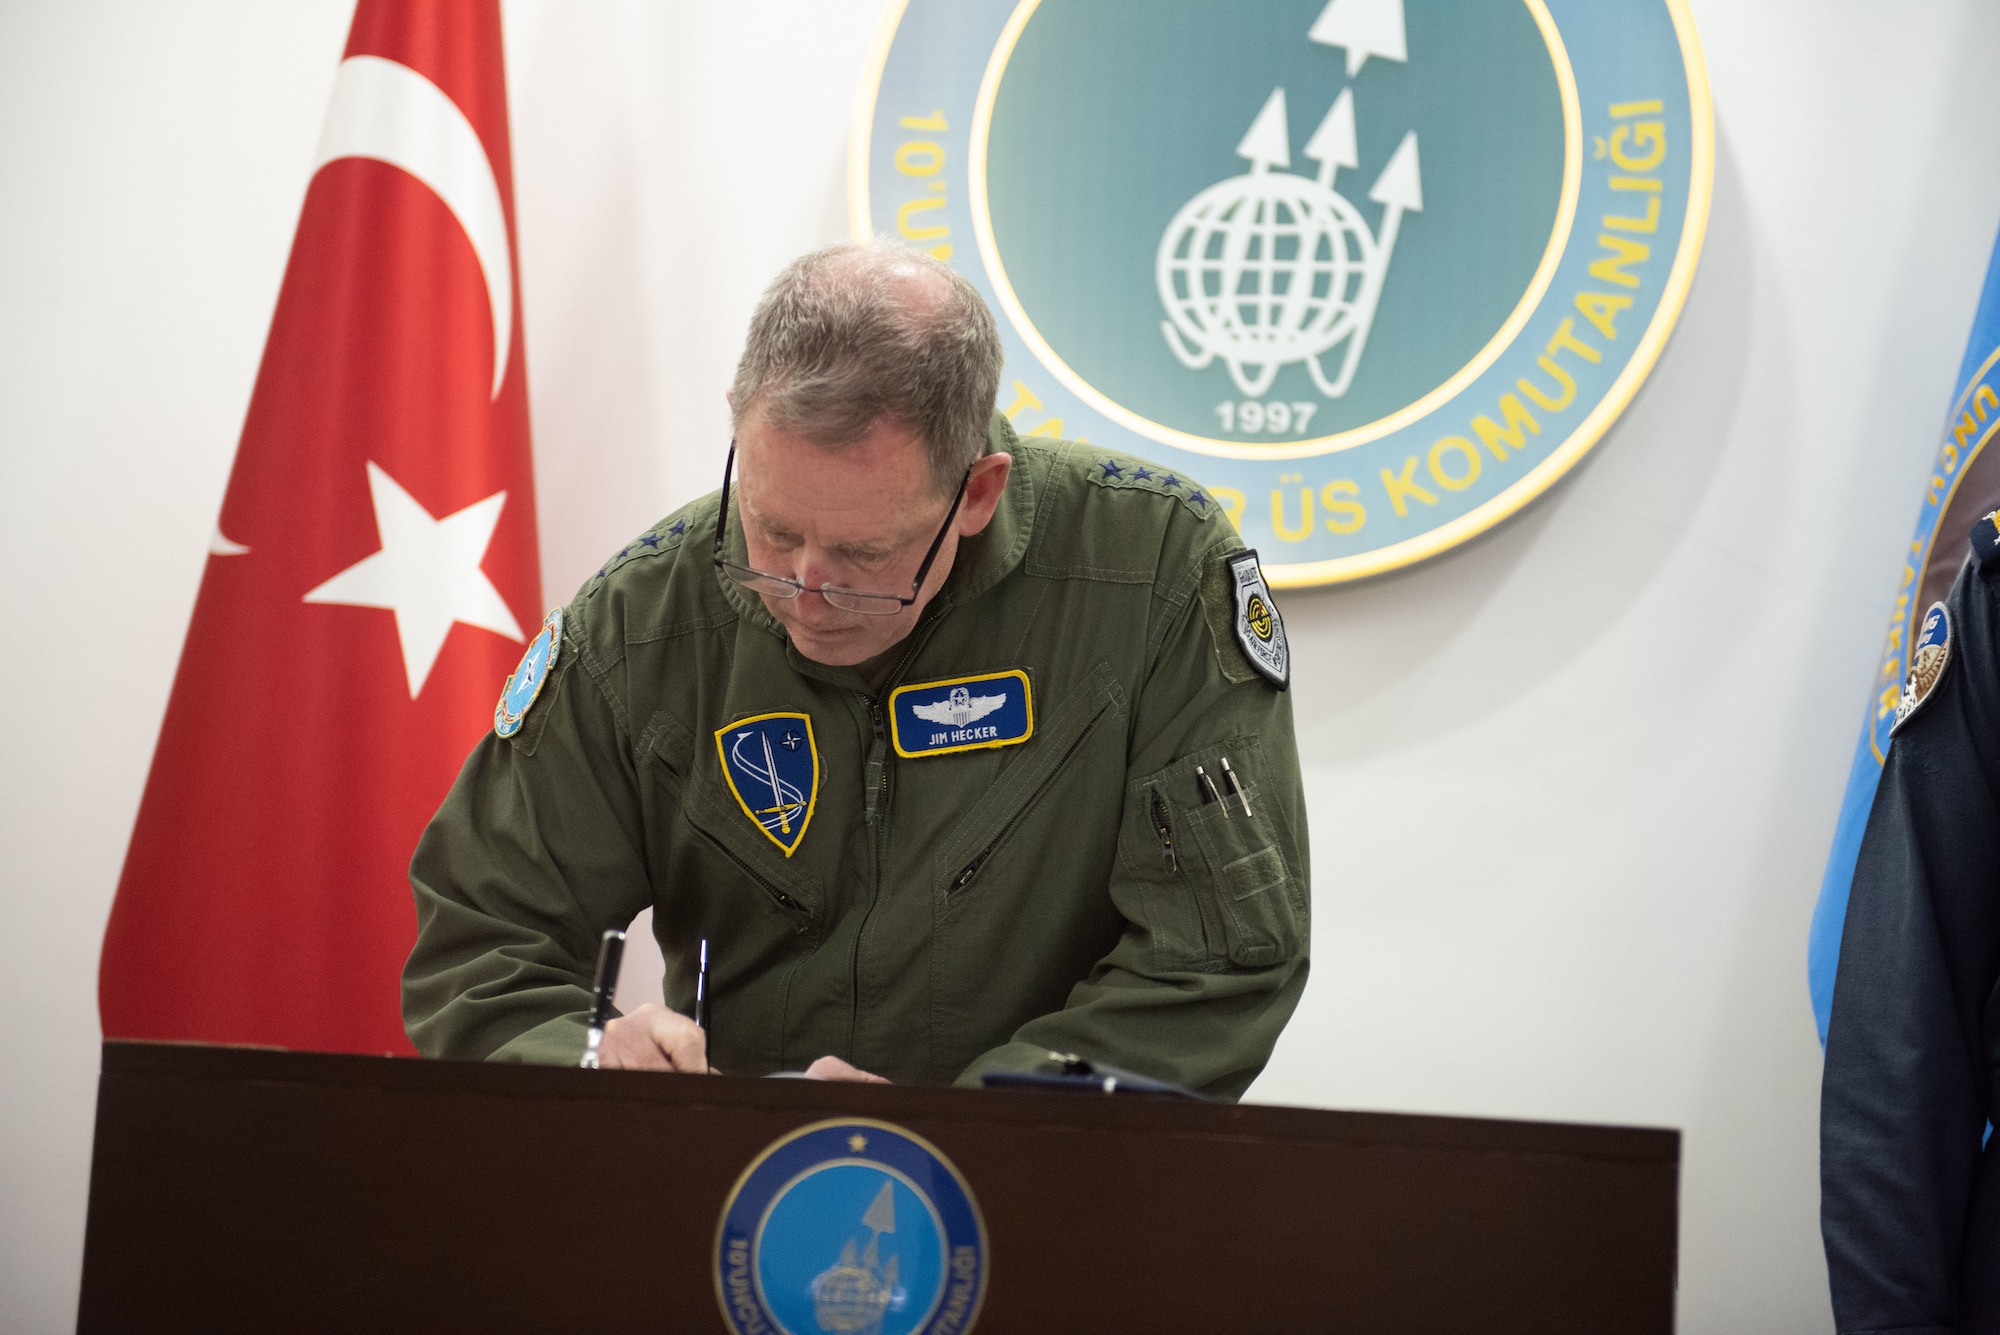 A man in a green flight suit signs a book placed on a podium.